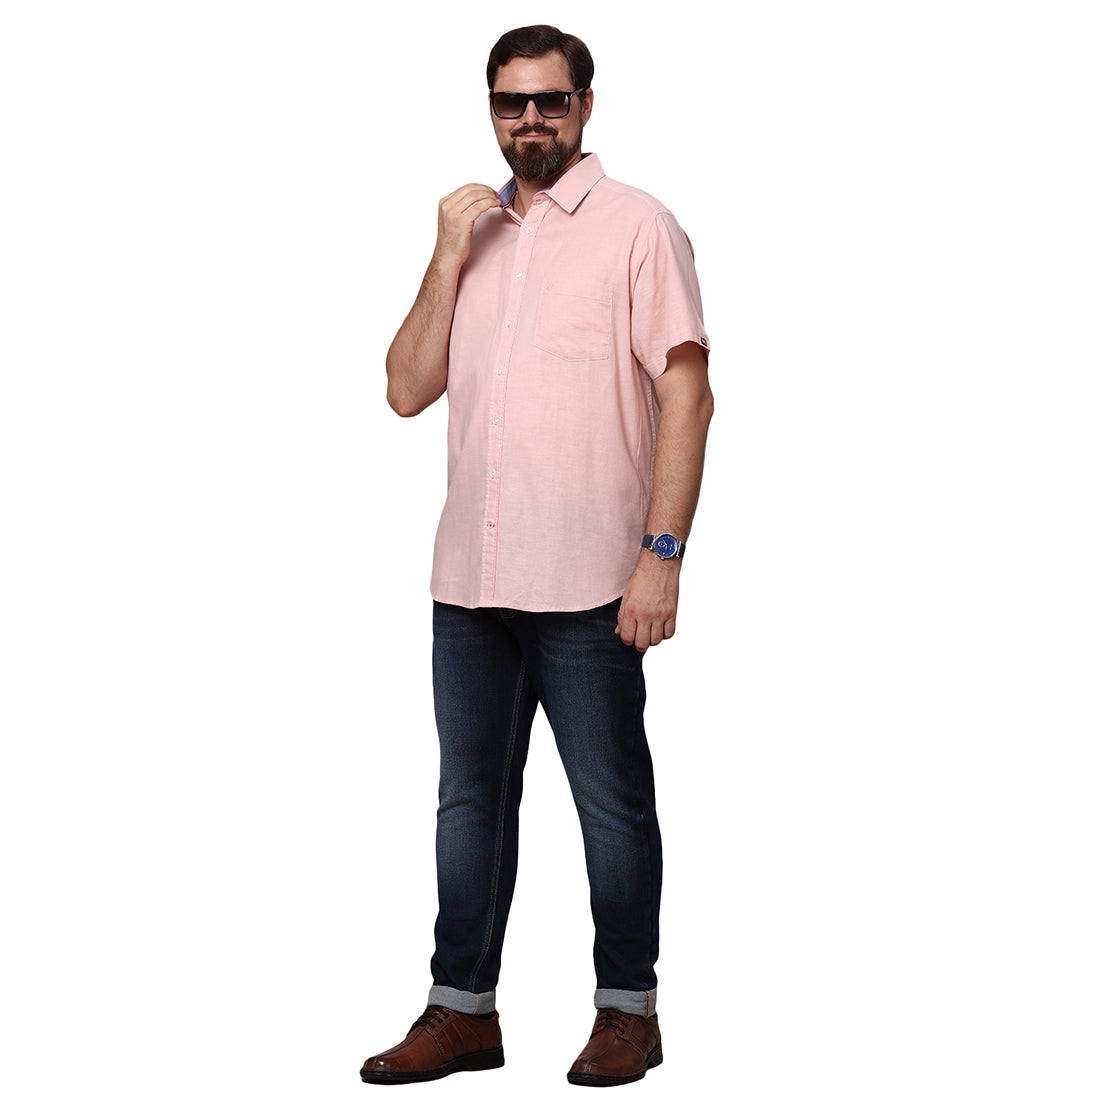 Big & Bold Solid Peach Half Sleeves Slim Fit Casual Shirts (Plus Size) - Double Two